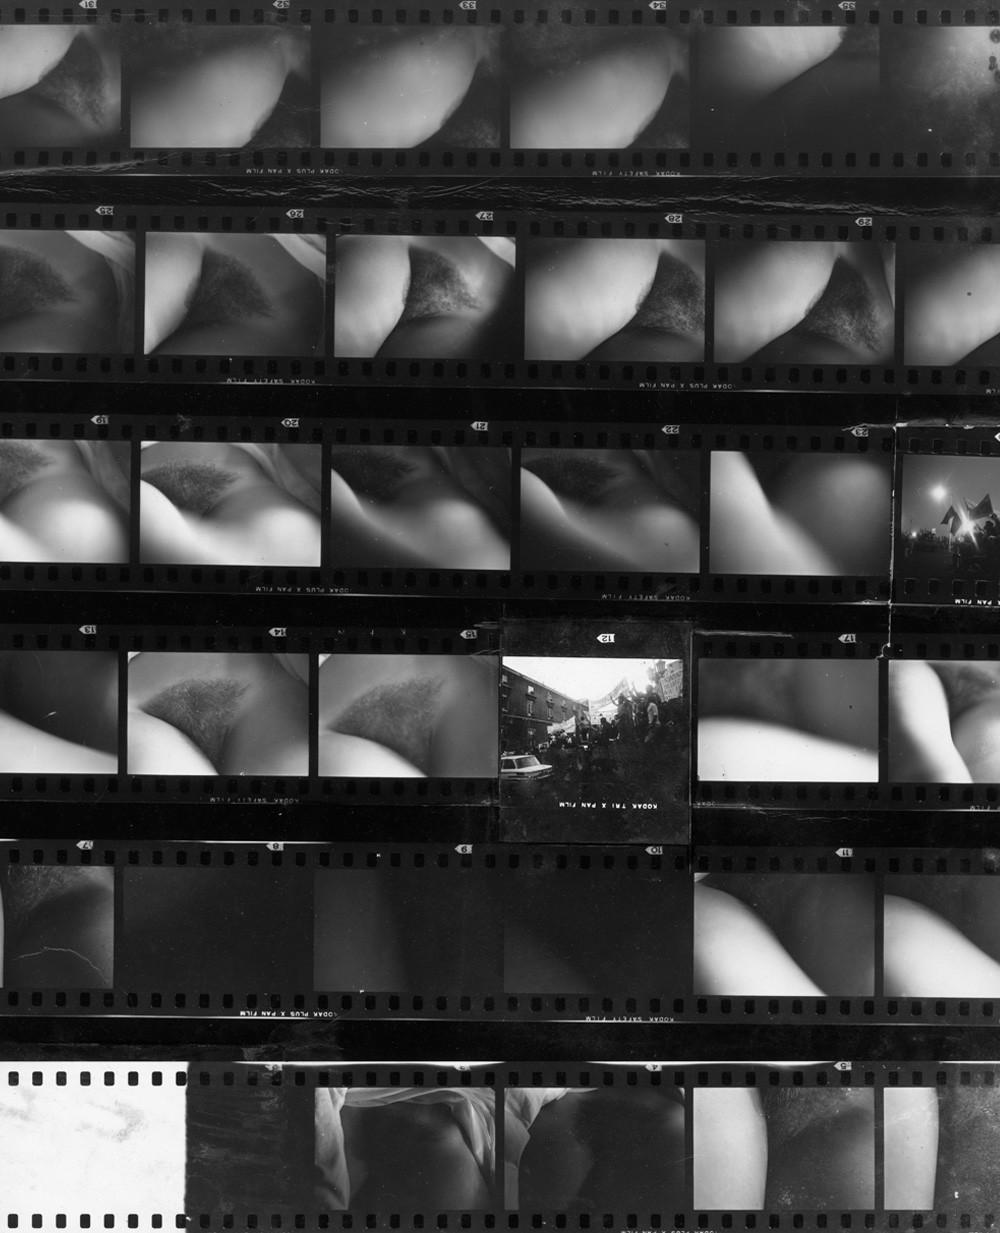  Ernesto de Sousa, photomontage on contact sheet, from the series "Your Body", c. 1974. 